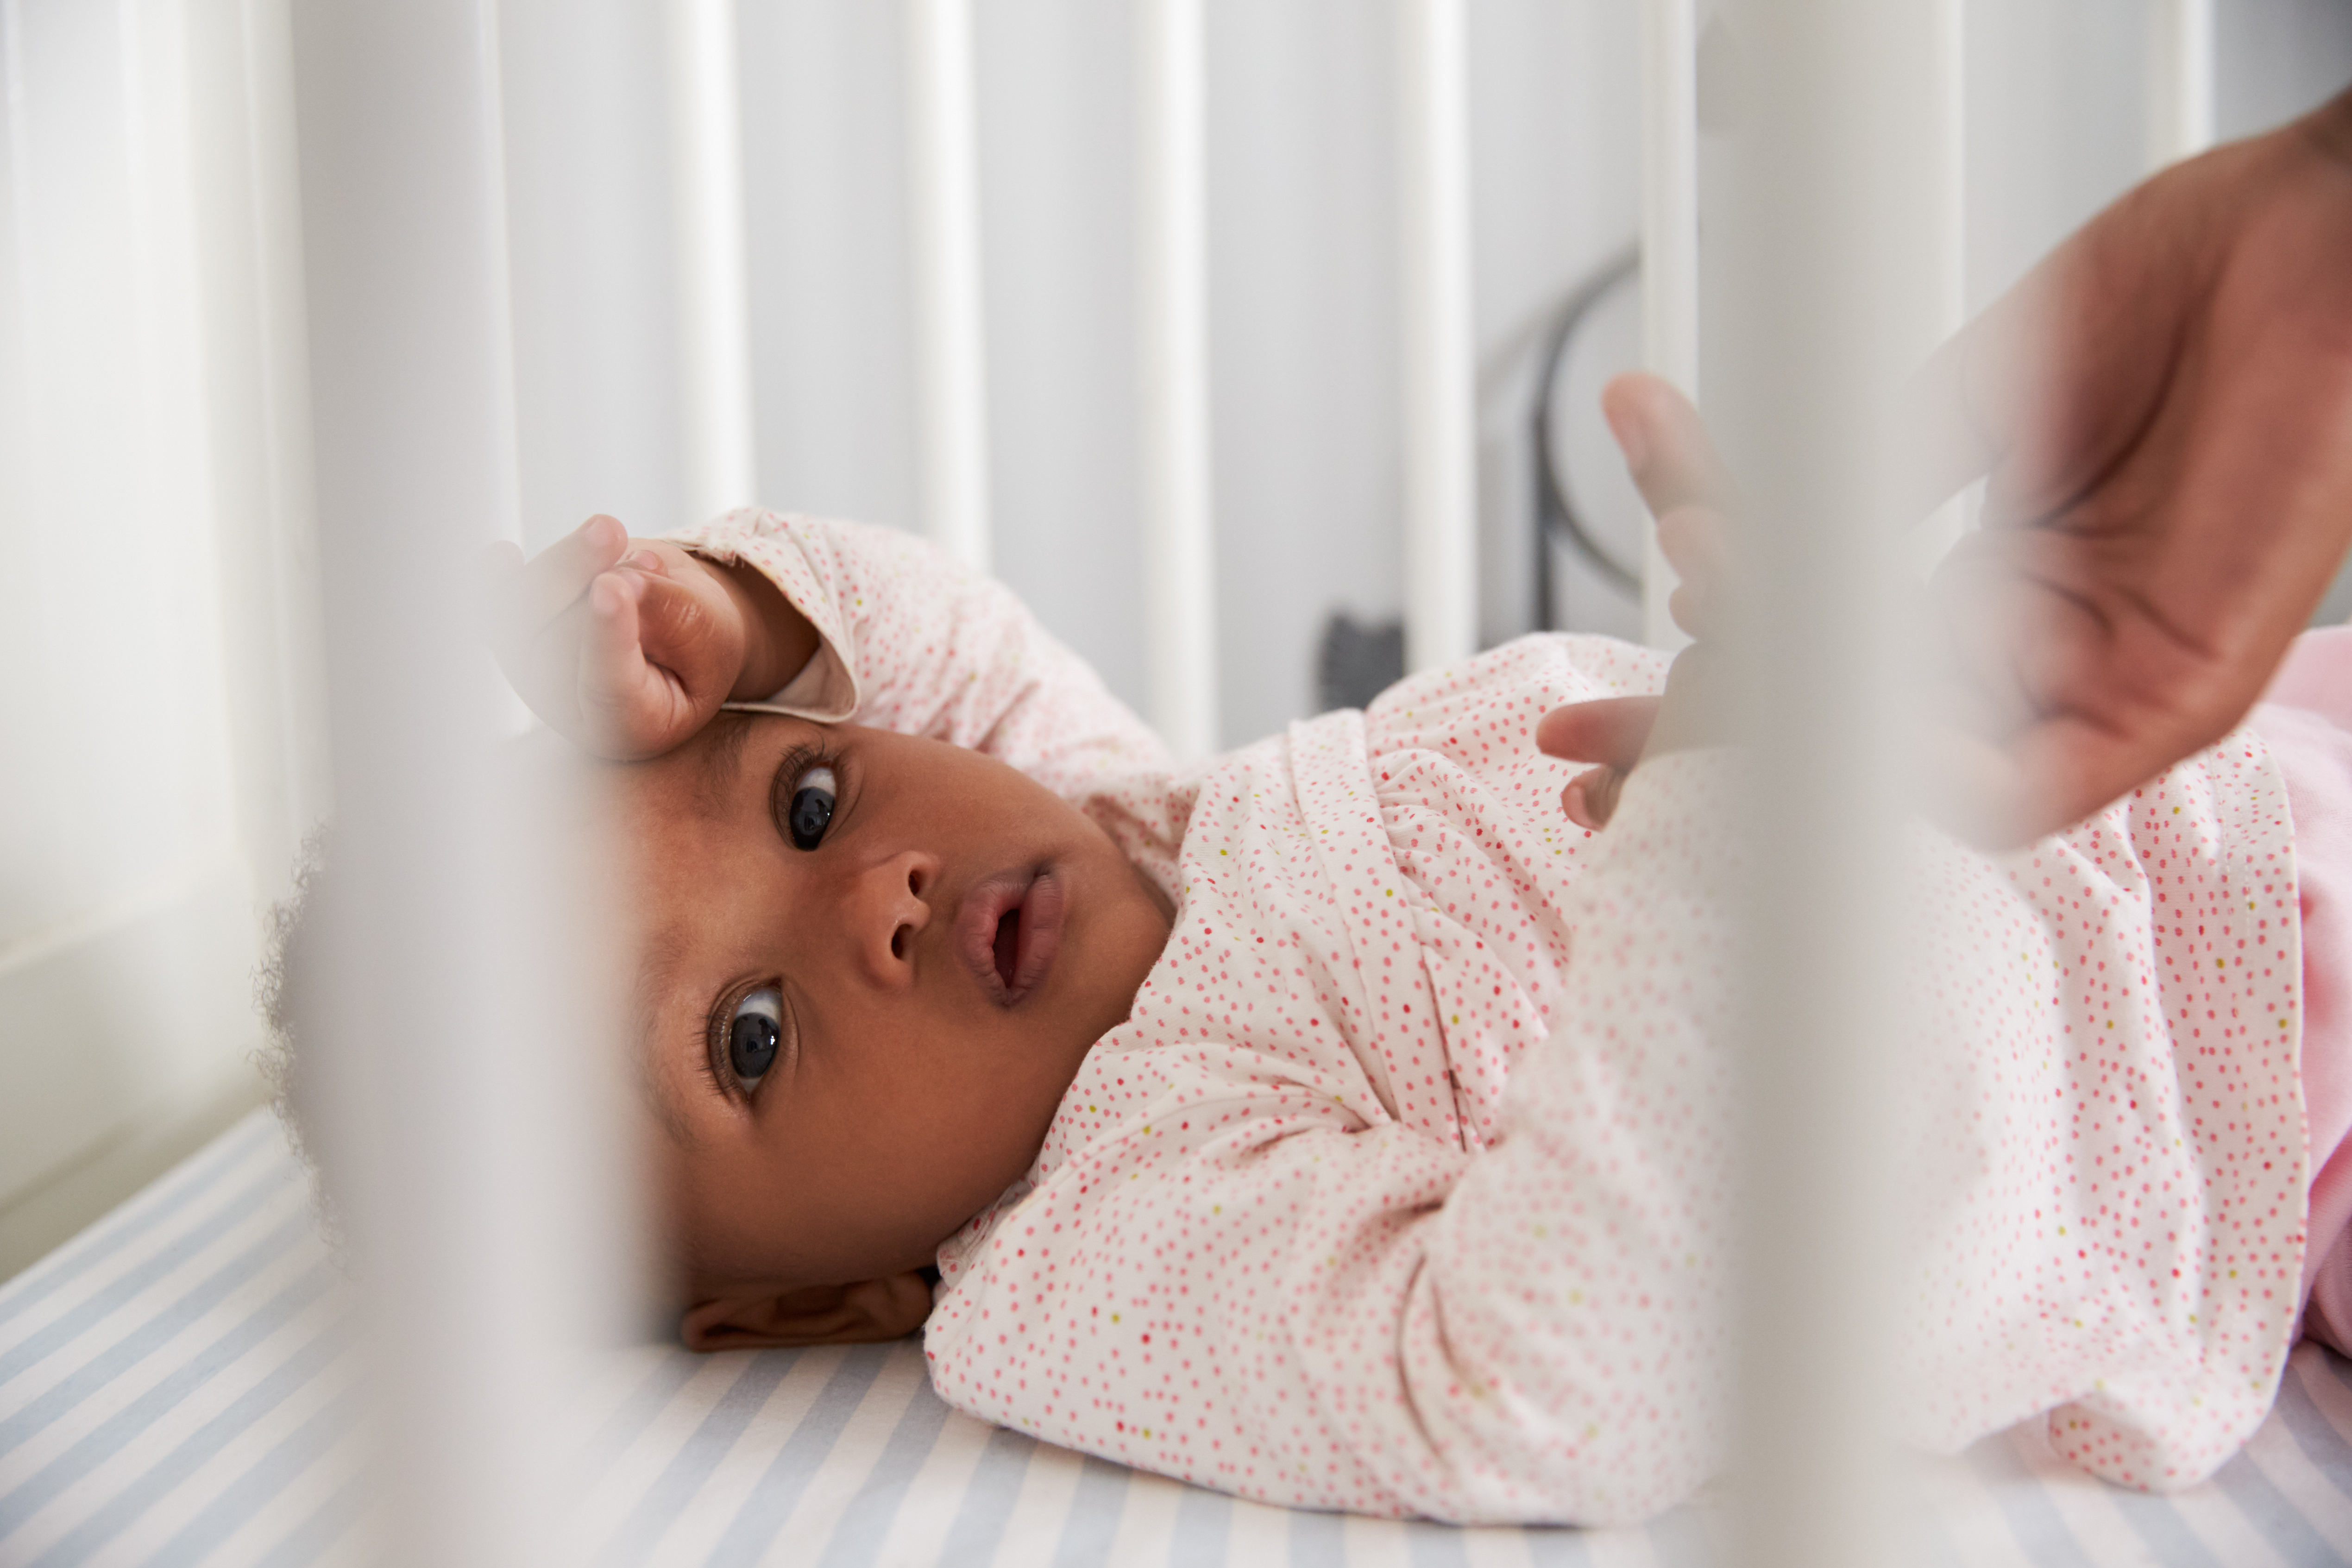 A baby wearing a pink outfit lays in a crib